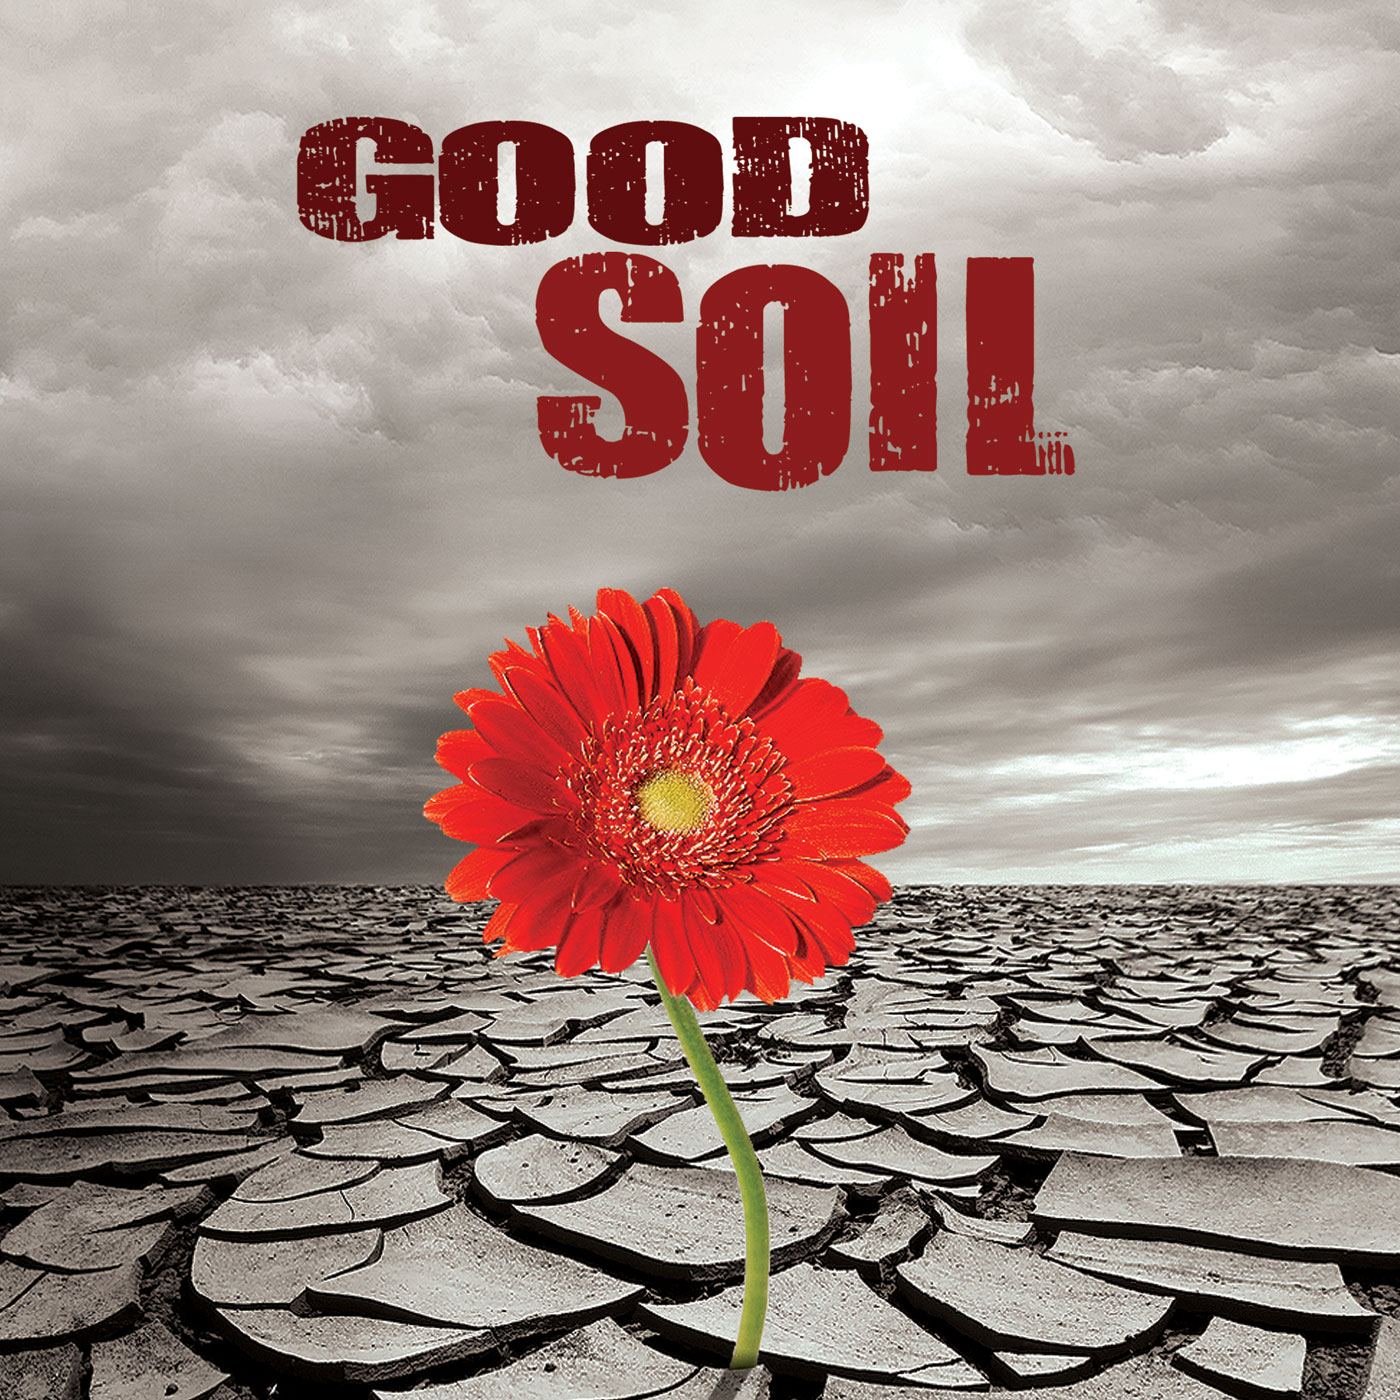 Good Soil - The Right Kind of Witness - Chris Wall - 2-3-2019